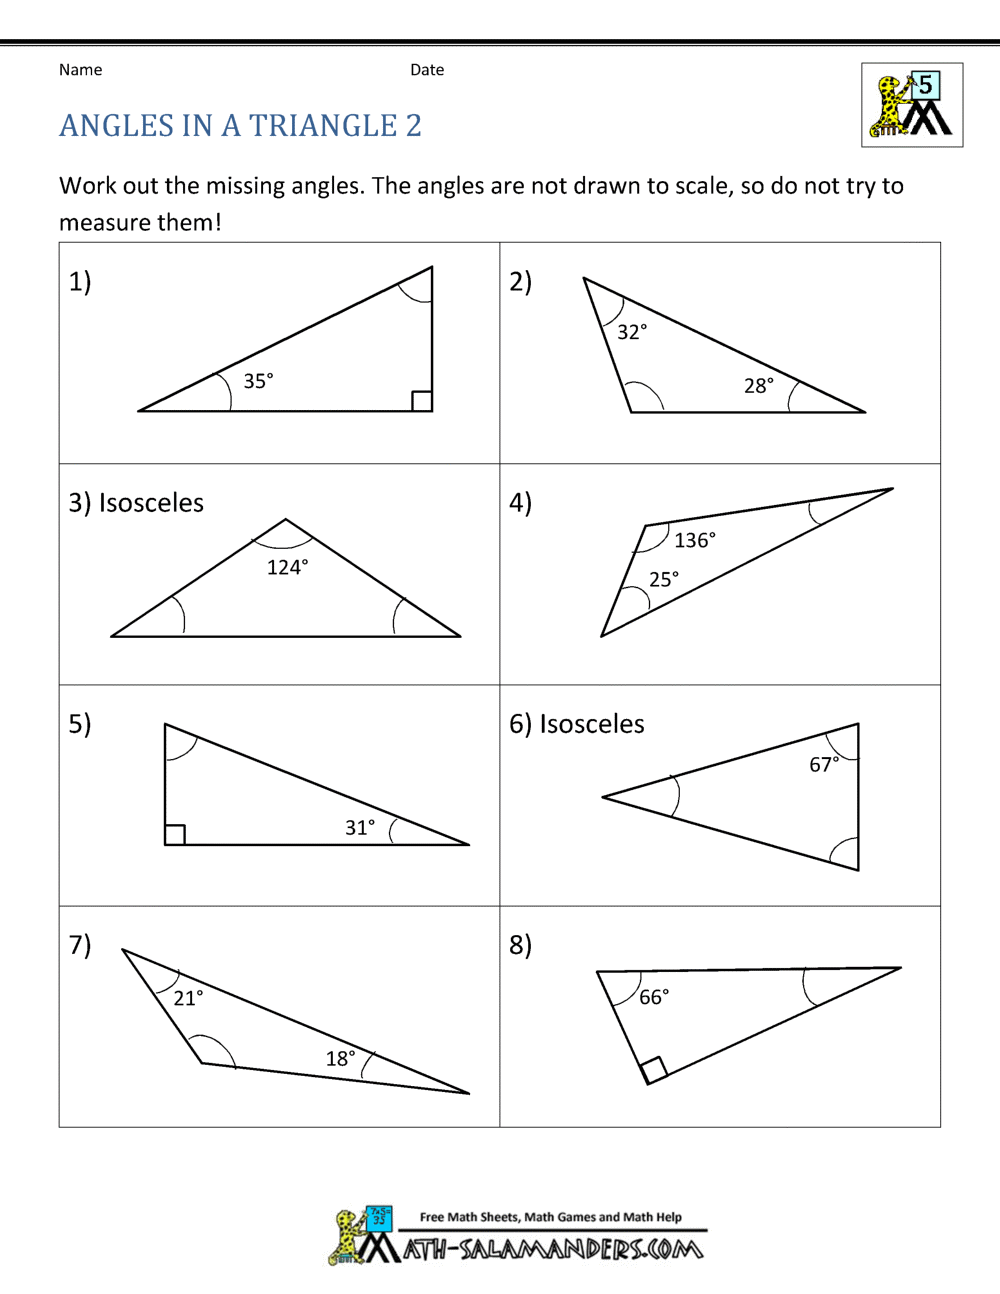 22th Grade Geometry For Triangle Angle Sum Worksheet